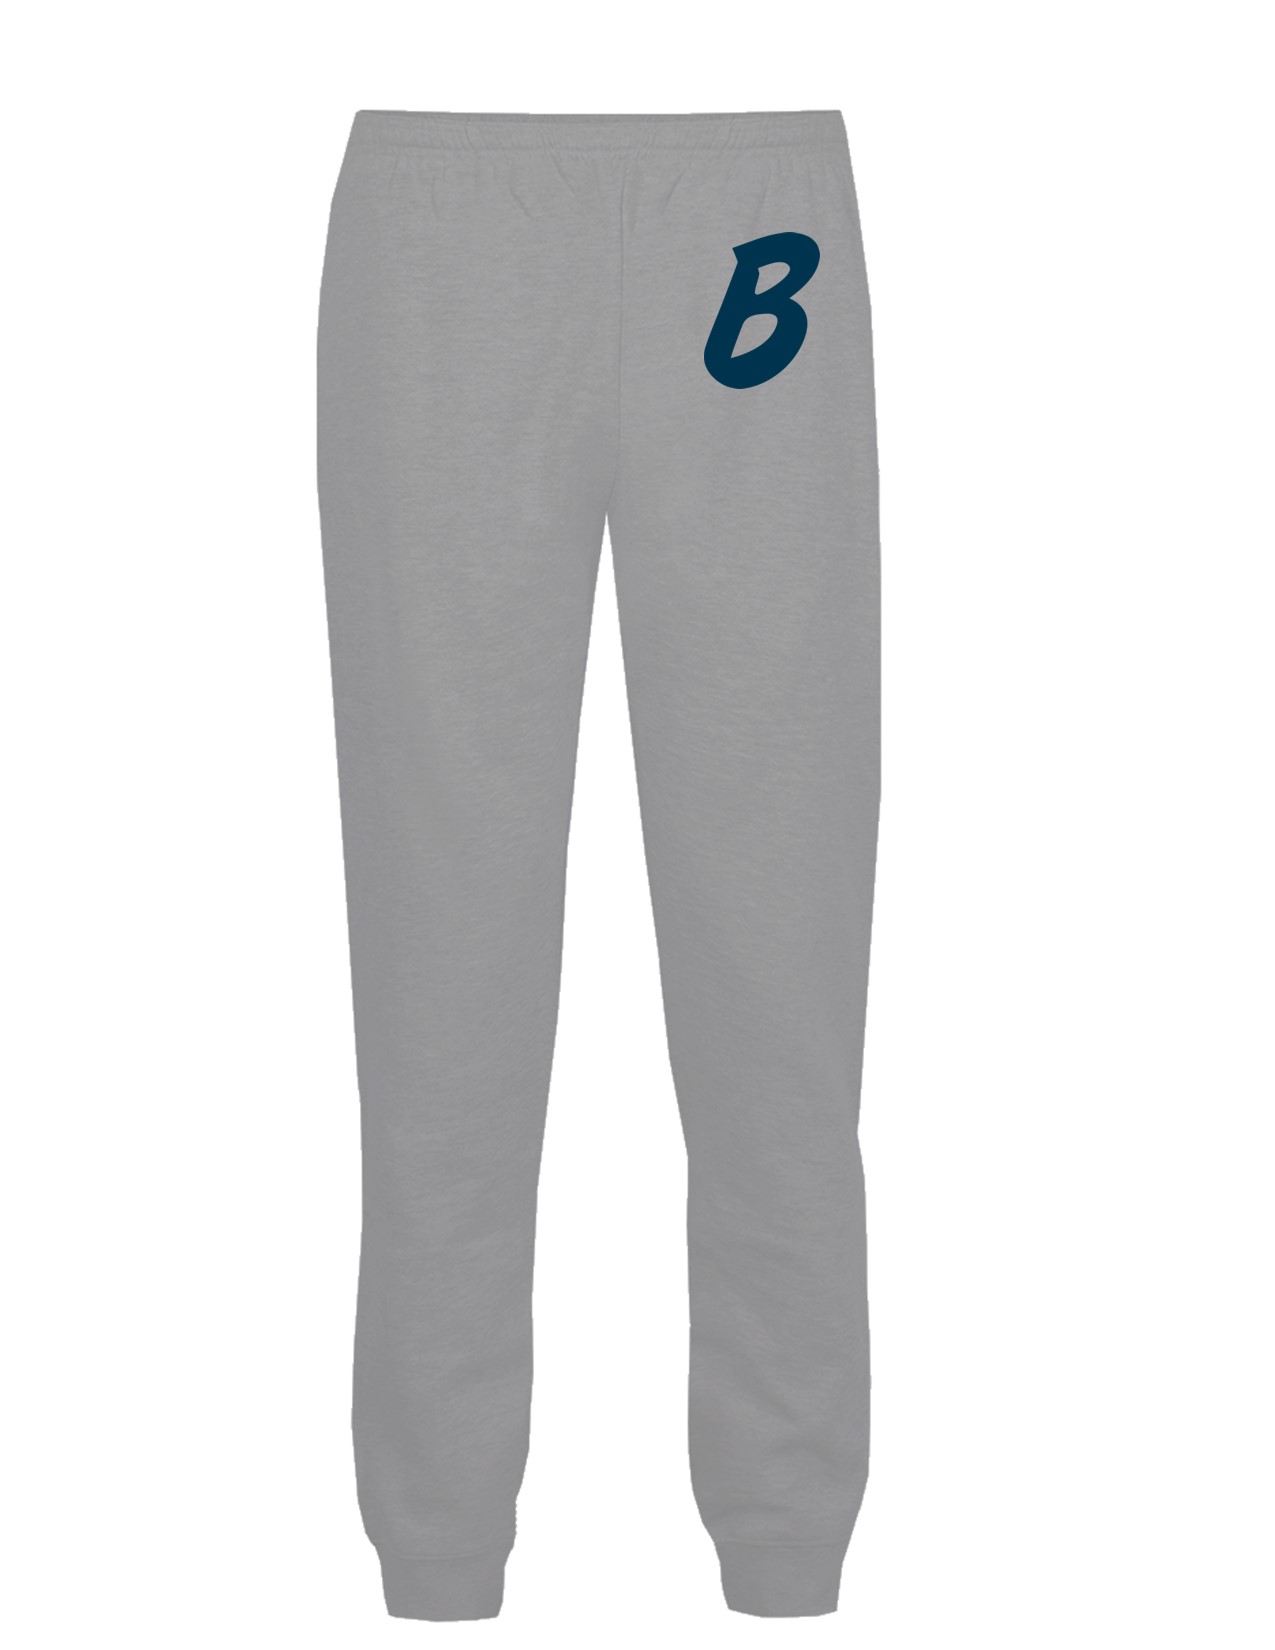 88 Badger 2215 Youth Athletic Fleece Jogger Pant with Left Hip Print